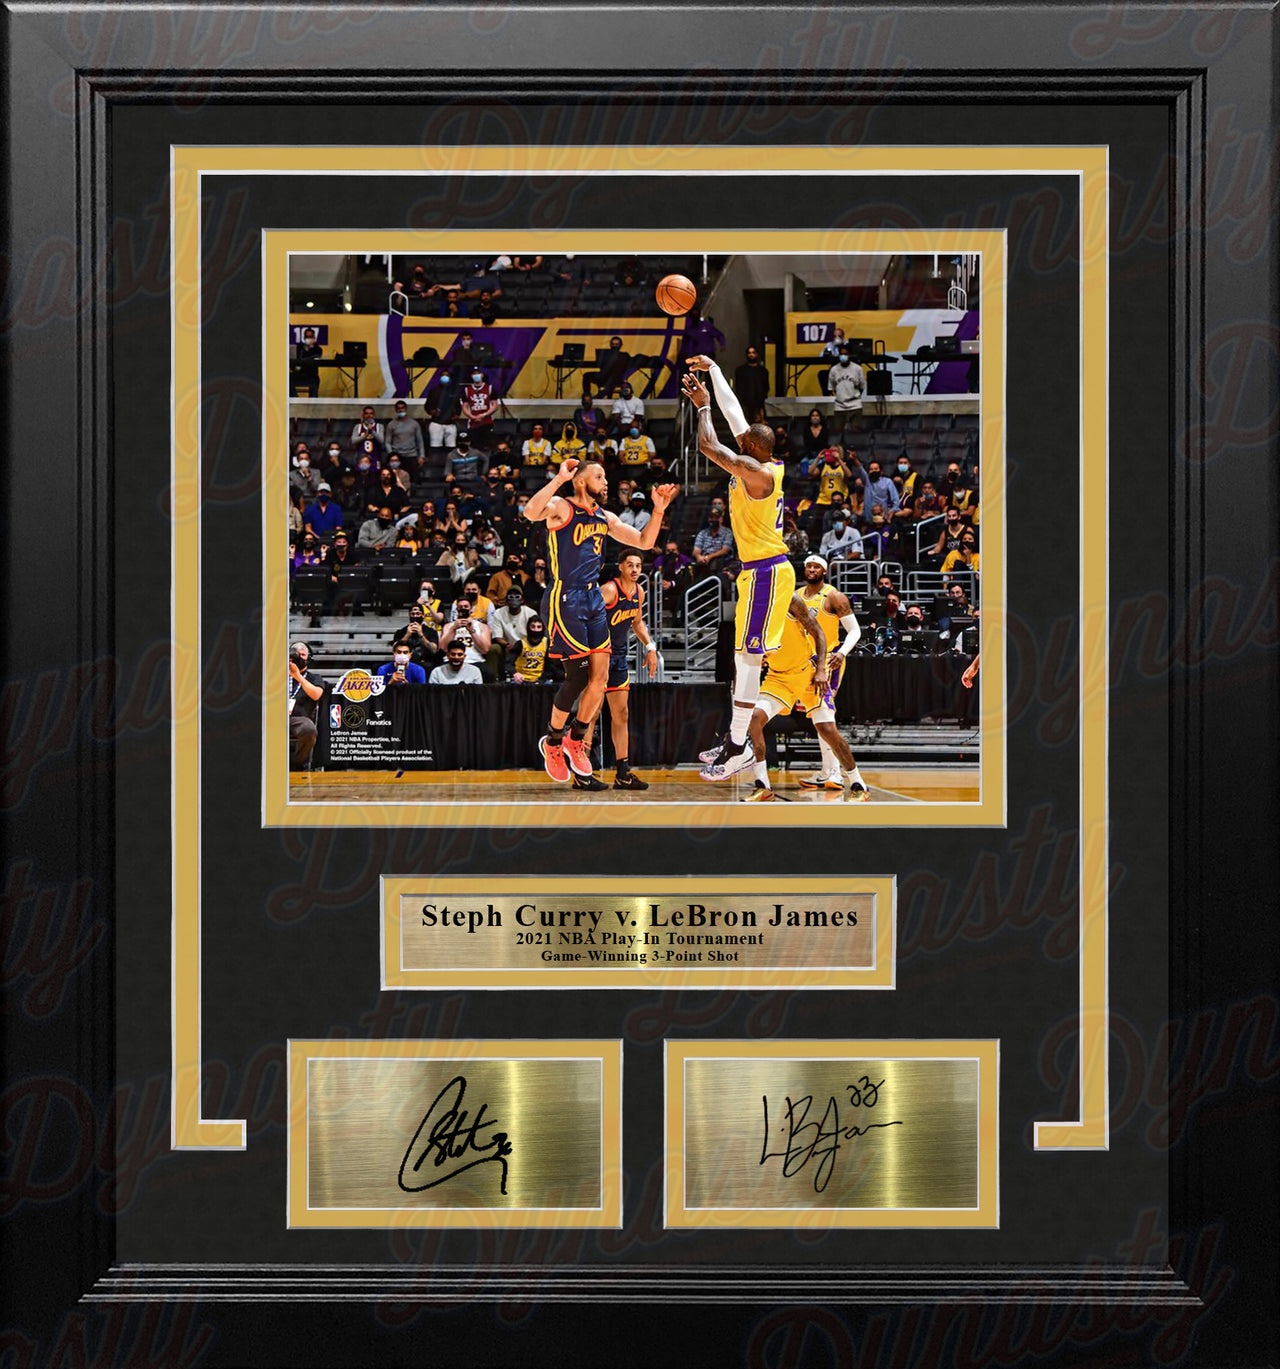 LeBron James v Steph Curry Game-Winning Shot 2021 Play-In 8x10 Framed Photo with Engraved Autographs - Dynasty Sports & Framing 